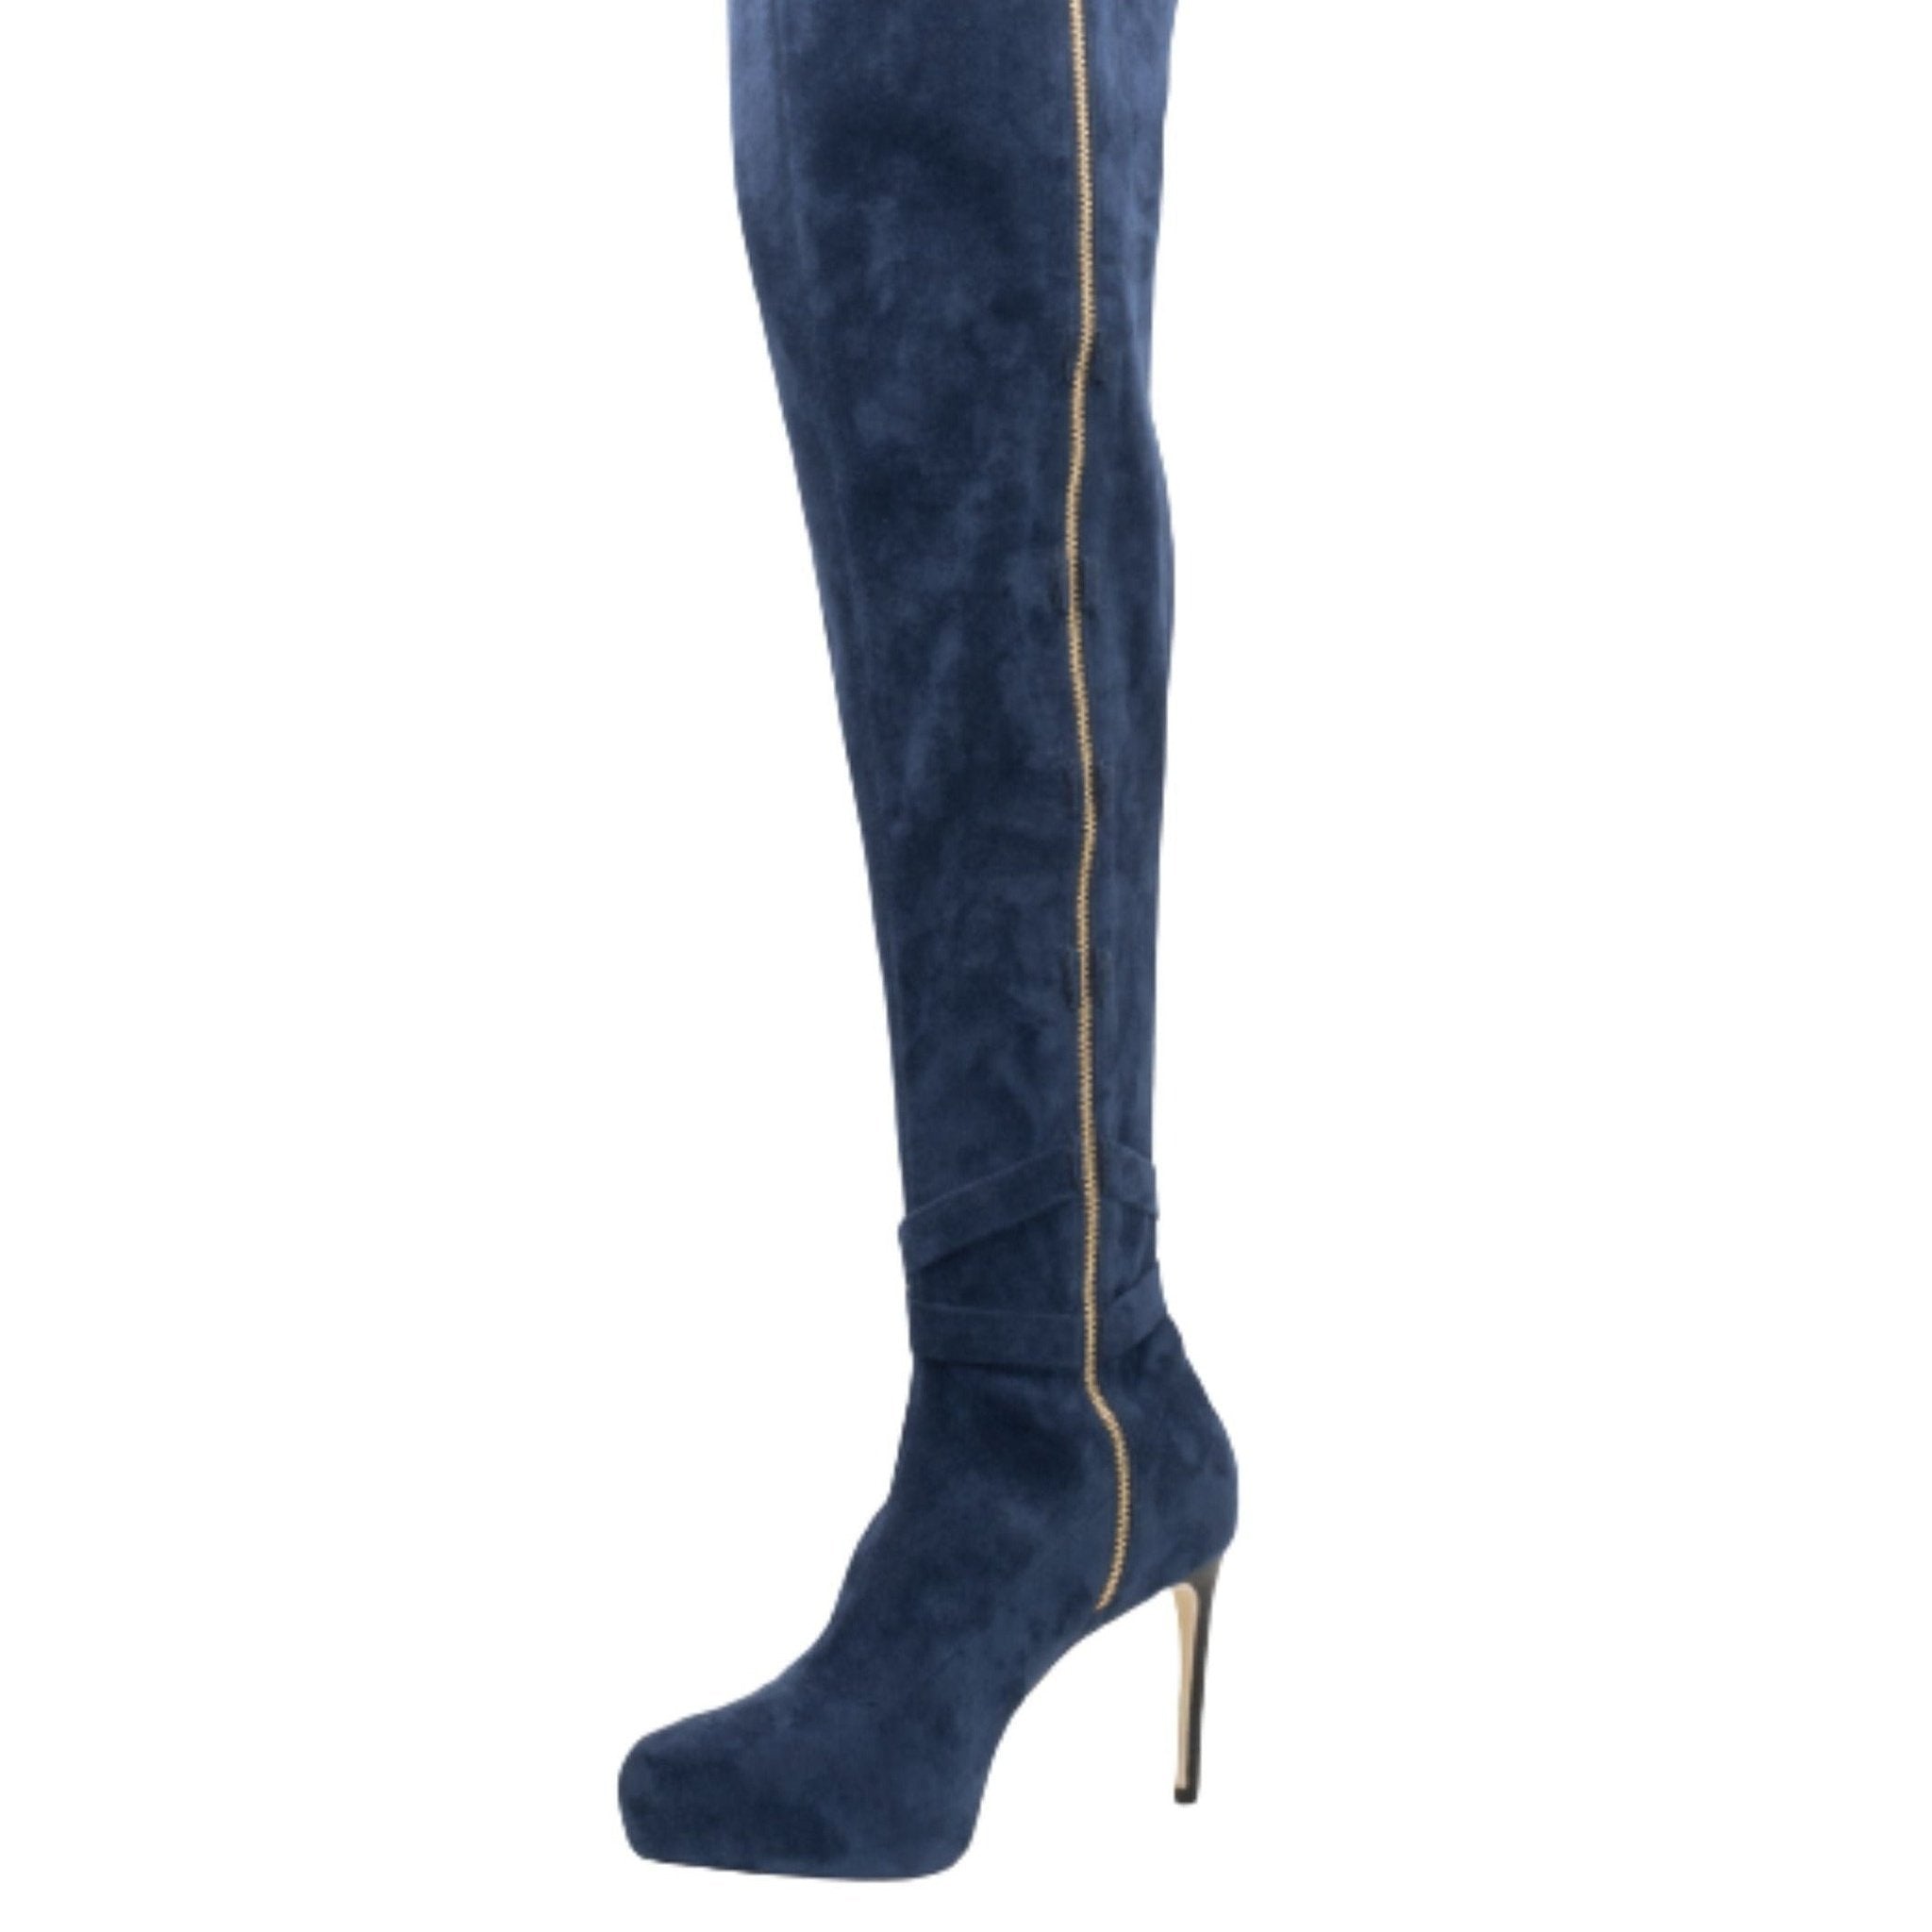 blue suede thigh high boot inside